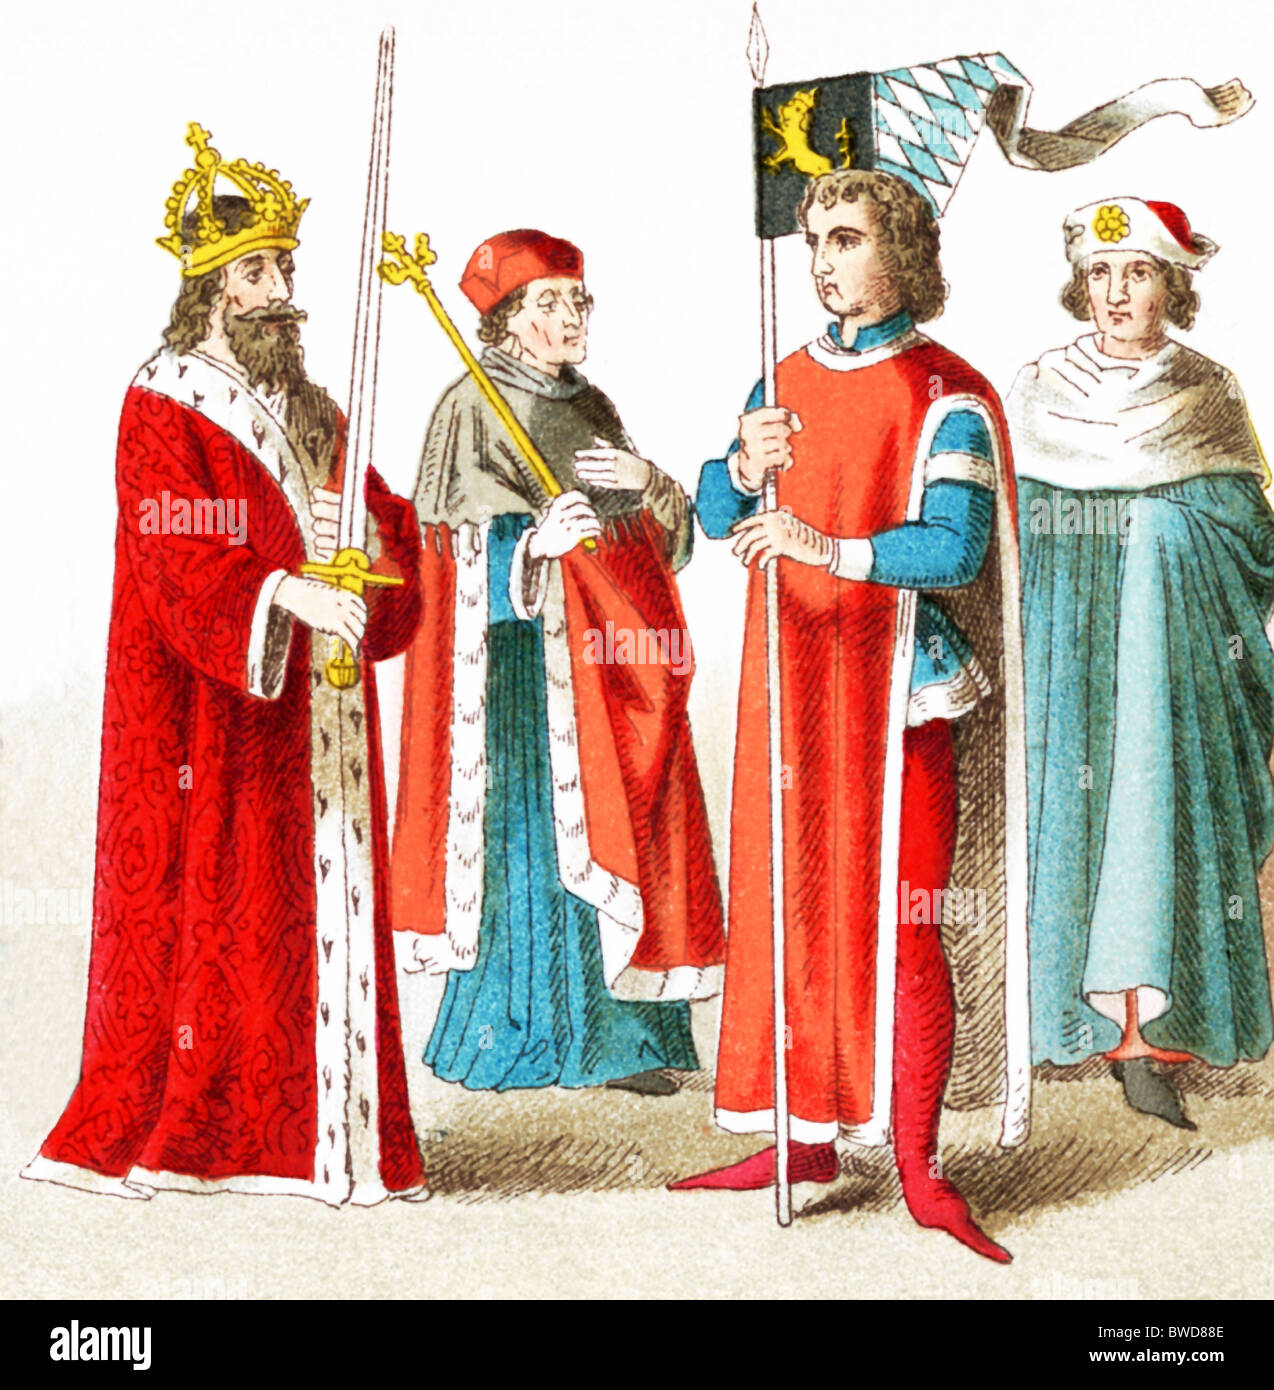 The figures pictured here represent Germans: A.D. 1400–1450:Emperor Sigismund, Electer Bishop, Duke of Bavaria, and a dignitary. Stock Photo